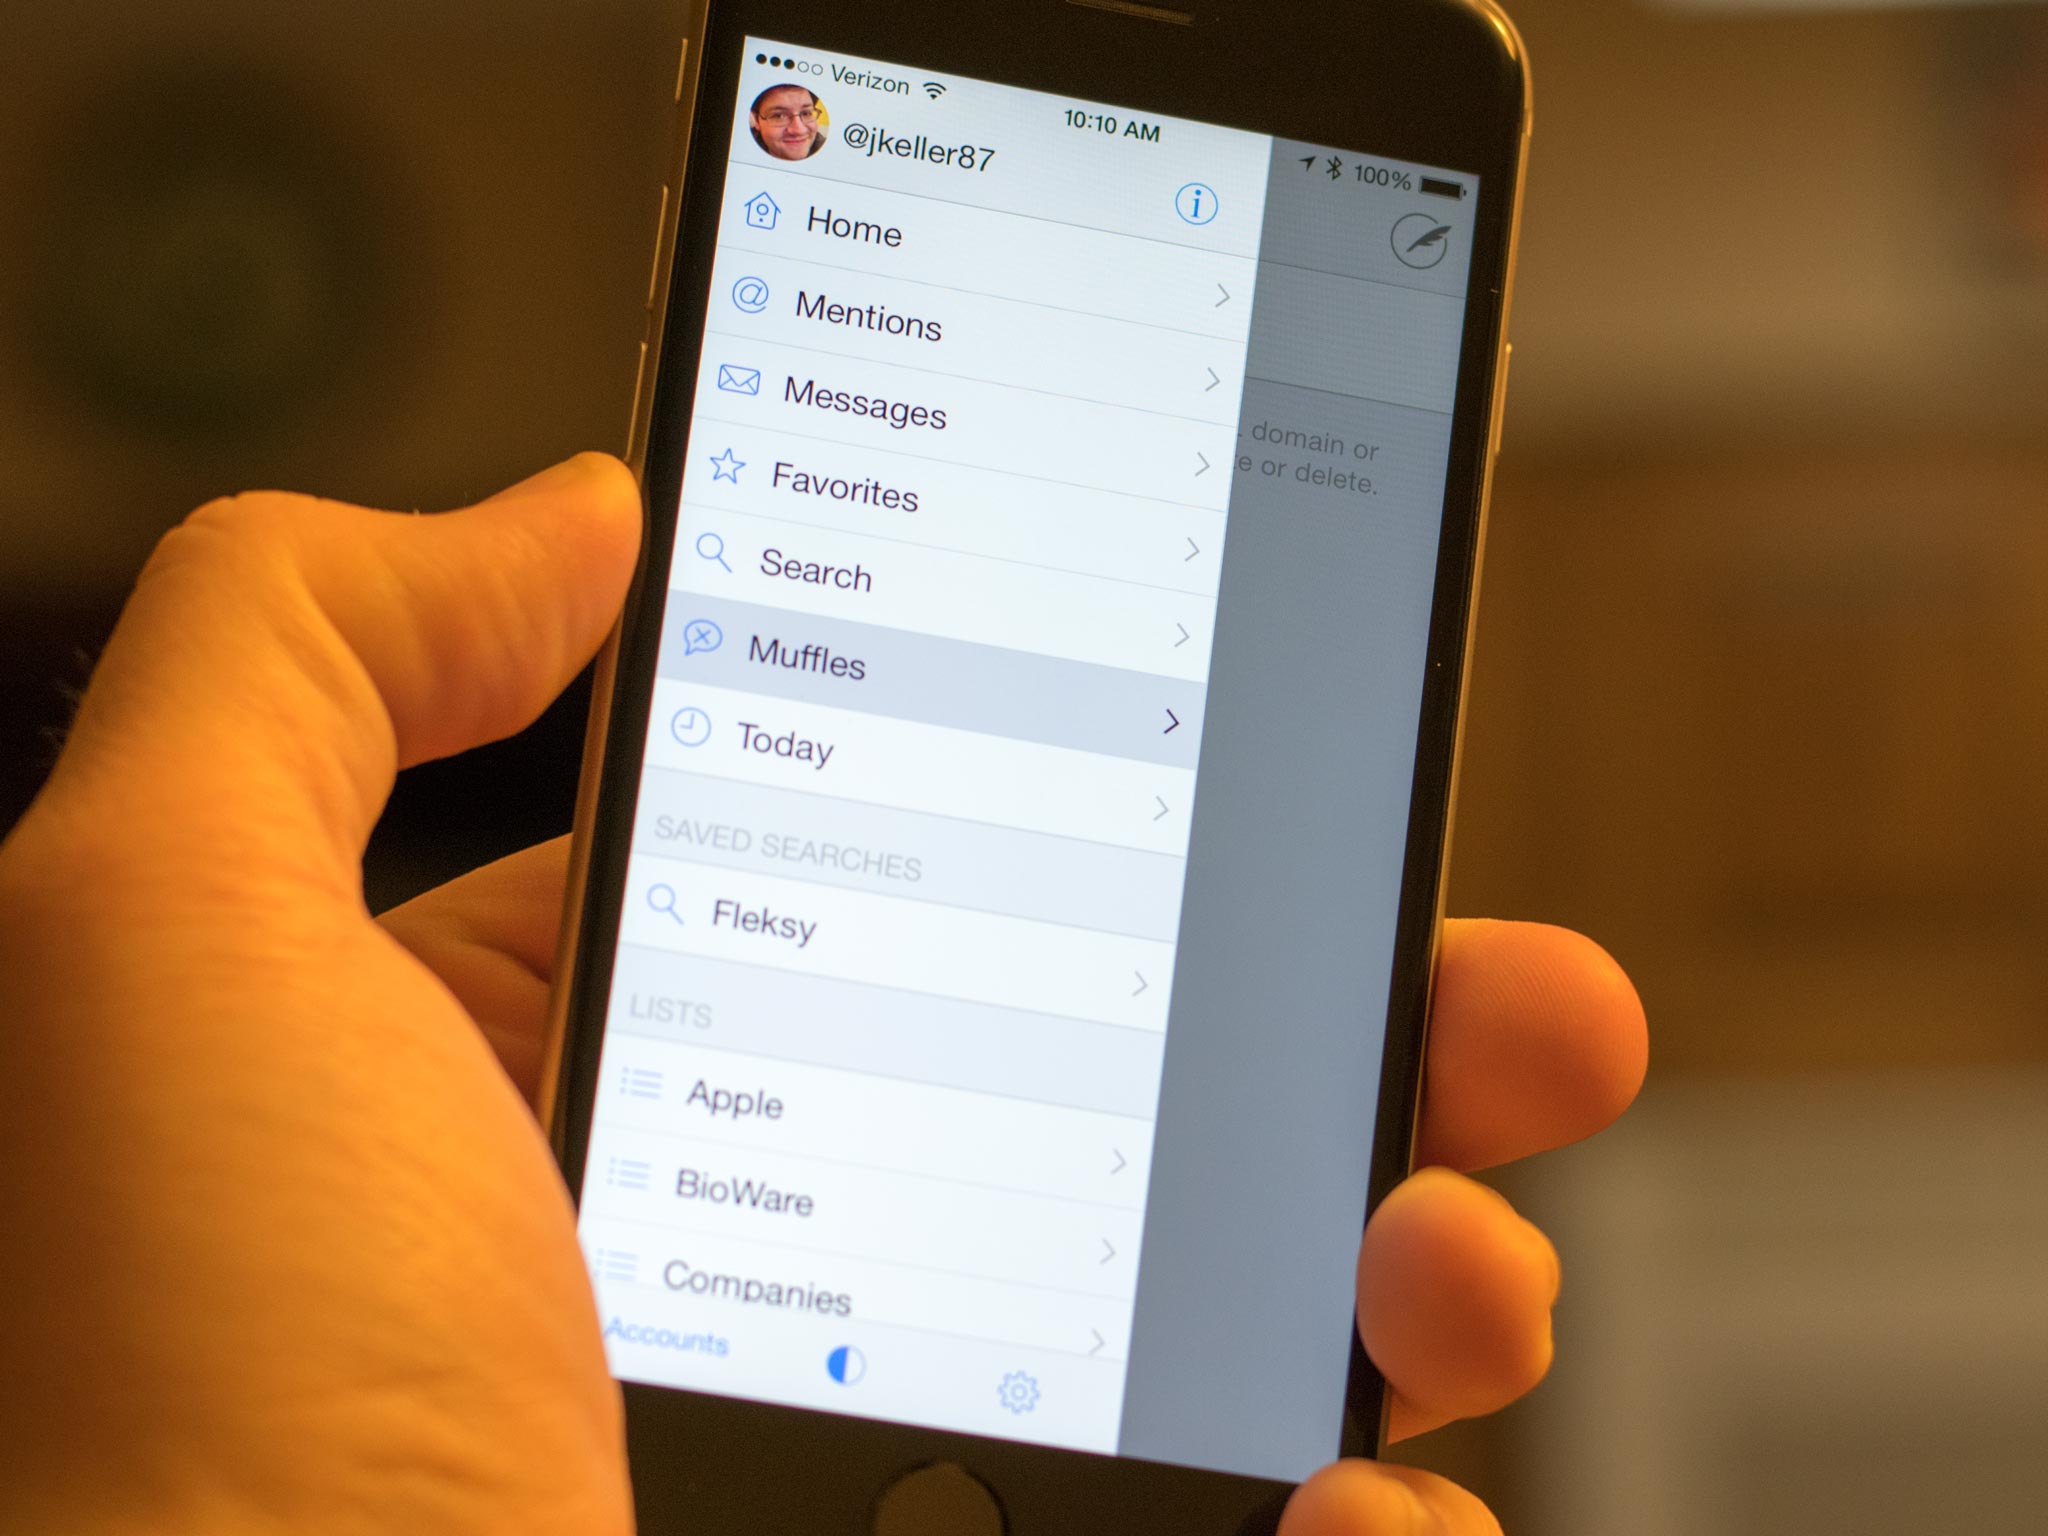 Twitterrific 5.10 adds draft support, new muting options, and more